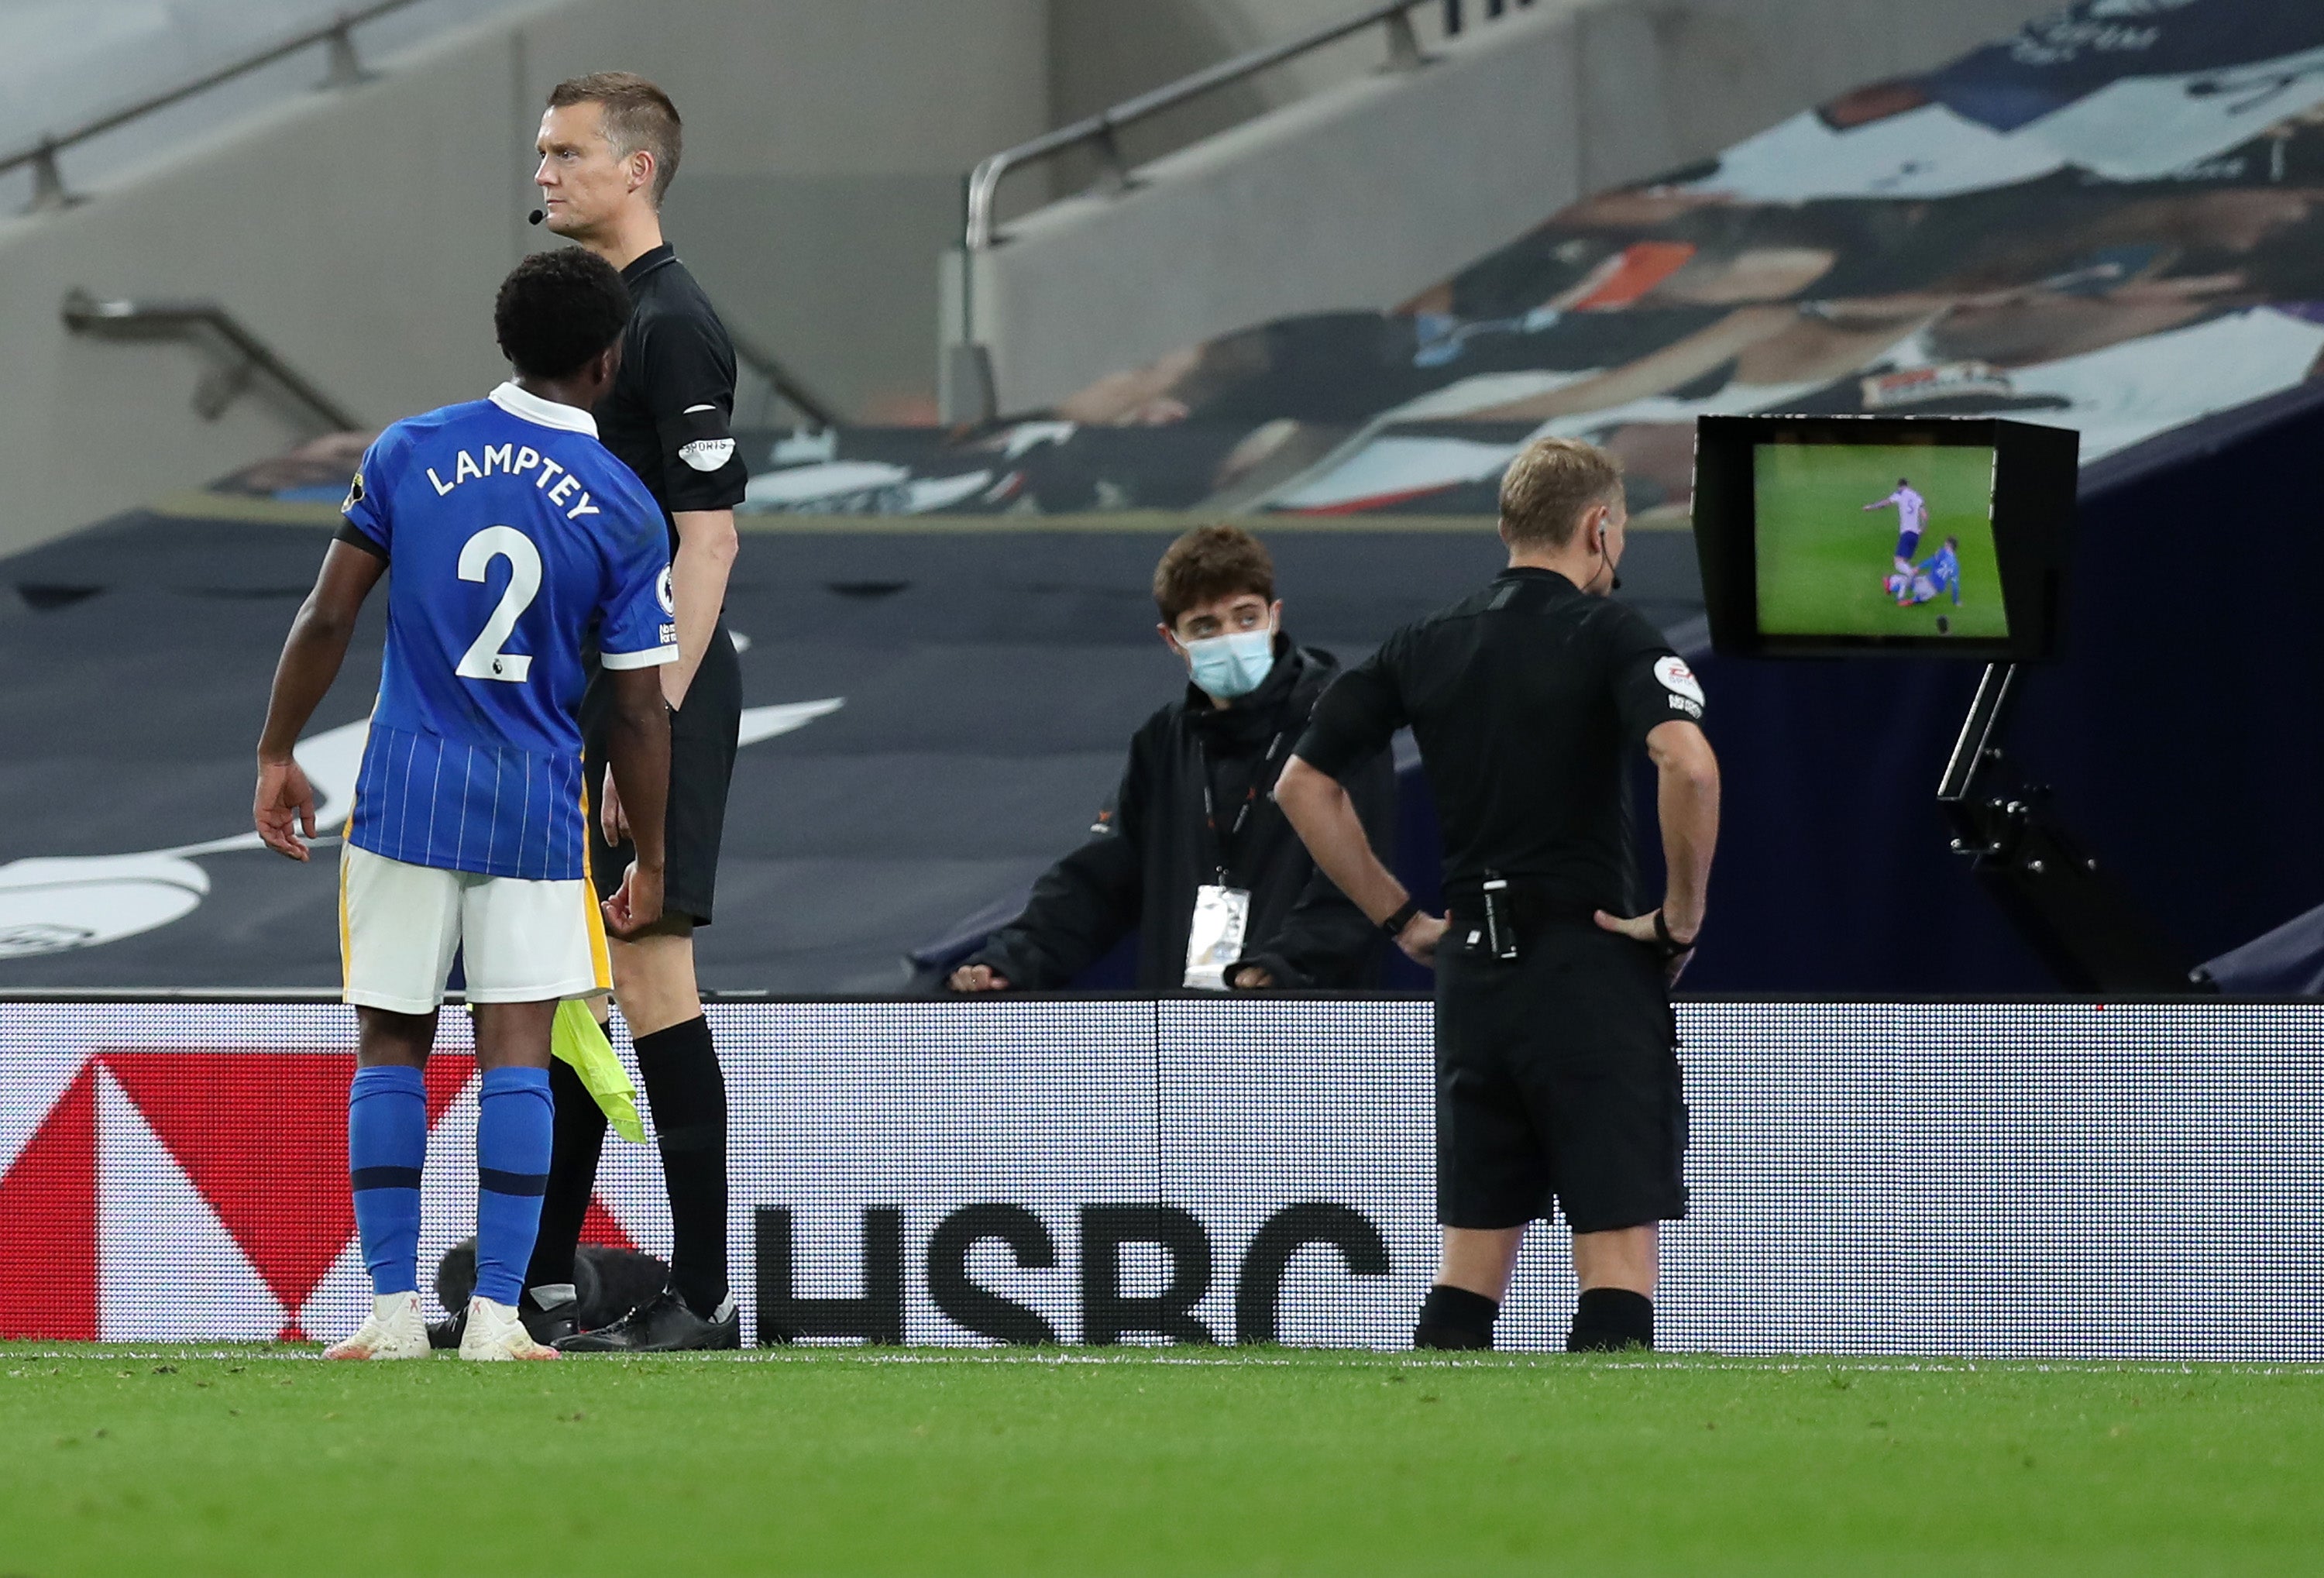 Tariq Lamptey’s equaliser controversially stood after a VAR check